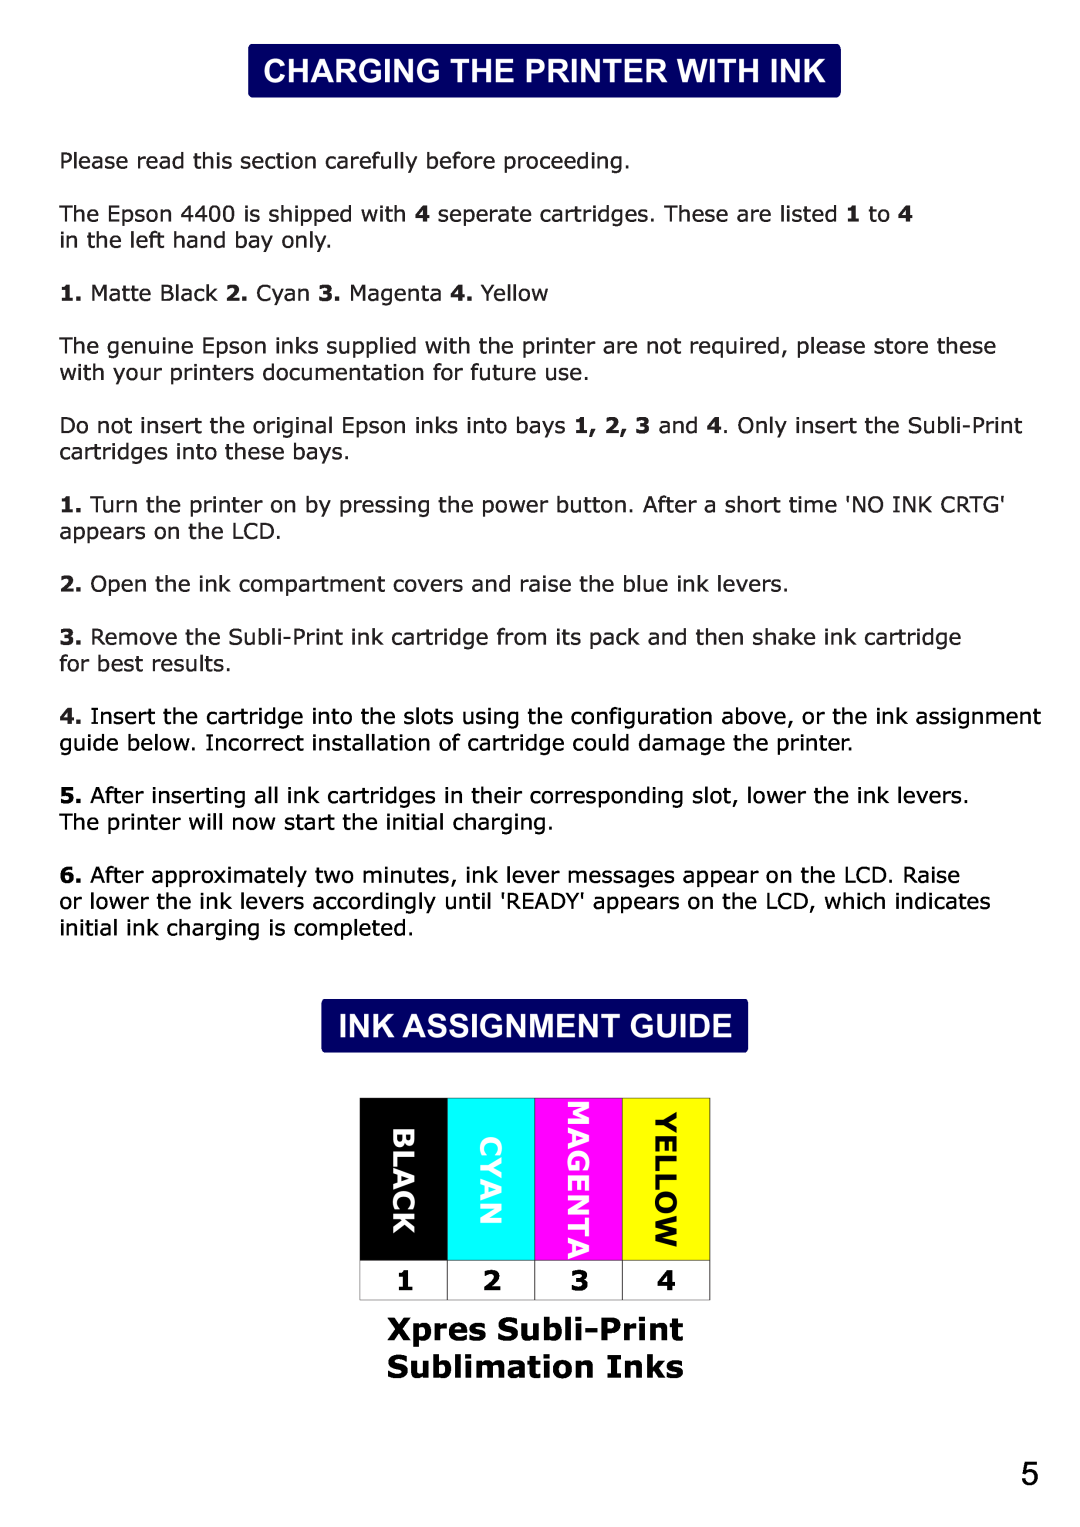 Epson 4450 Charging The Printer With Ink, Ink Assignment Guide, Xpres Subli-Print Sublimation Inks, Black, Cyan, Magenta 